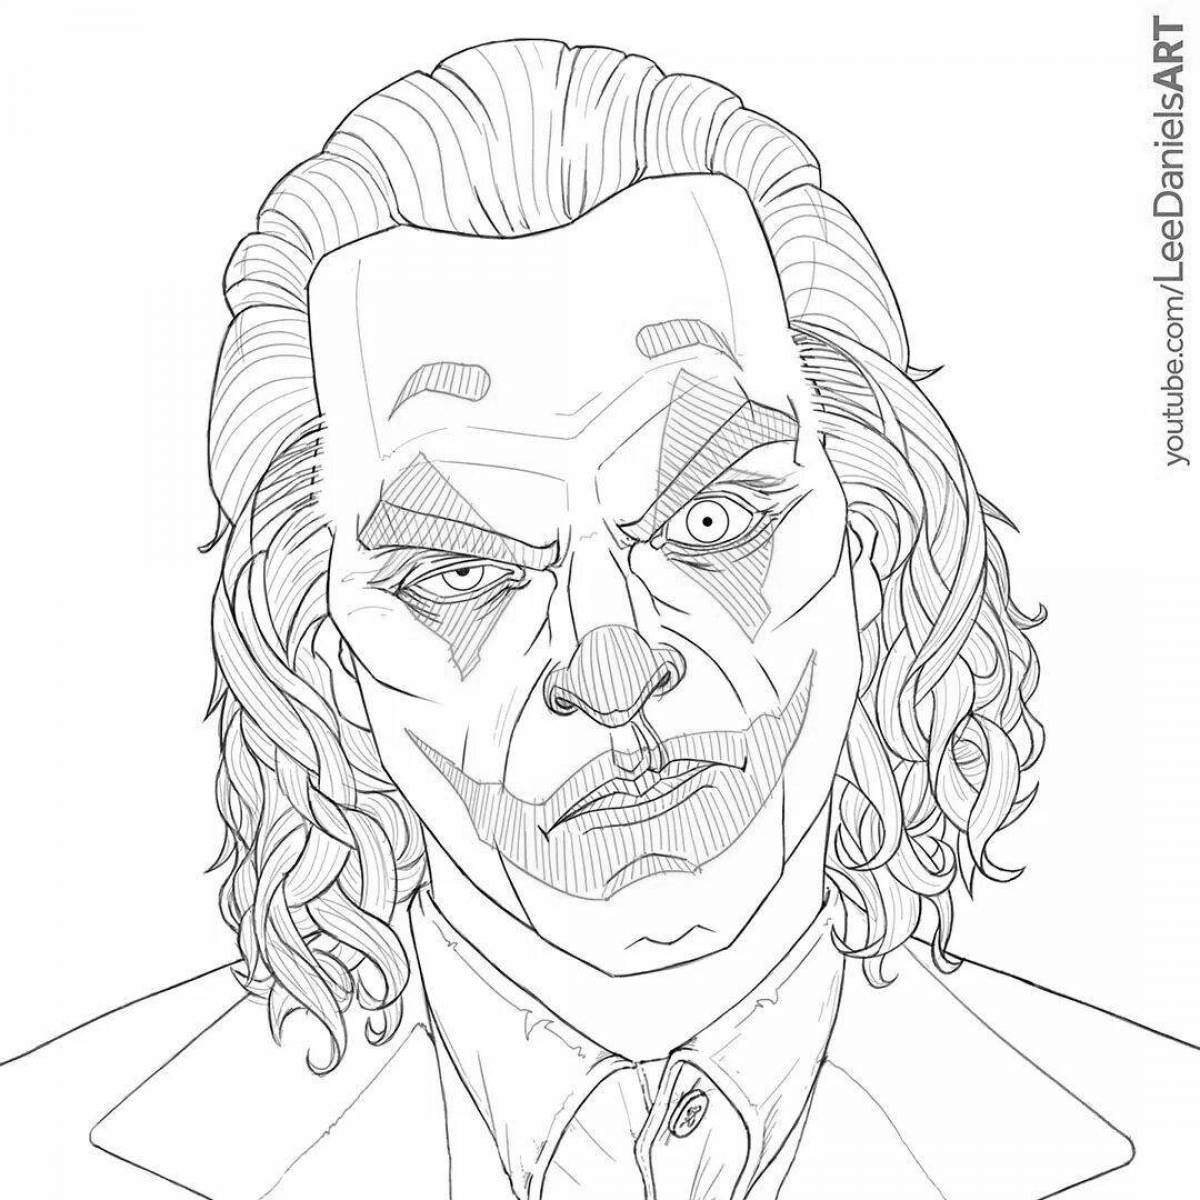 Mystical joker face coloring page